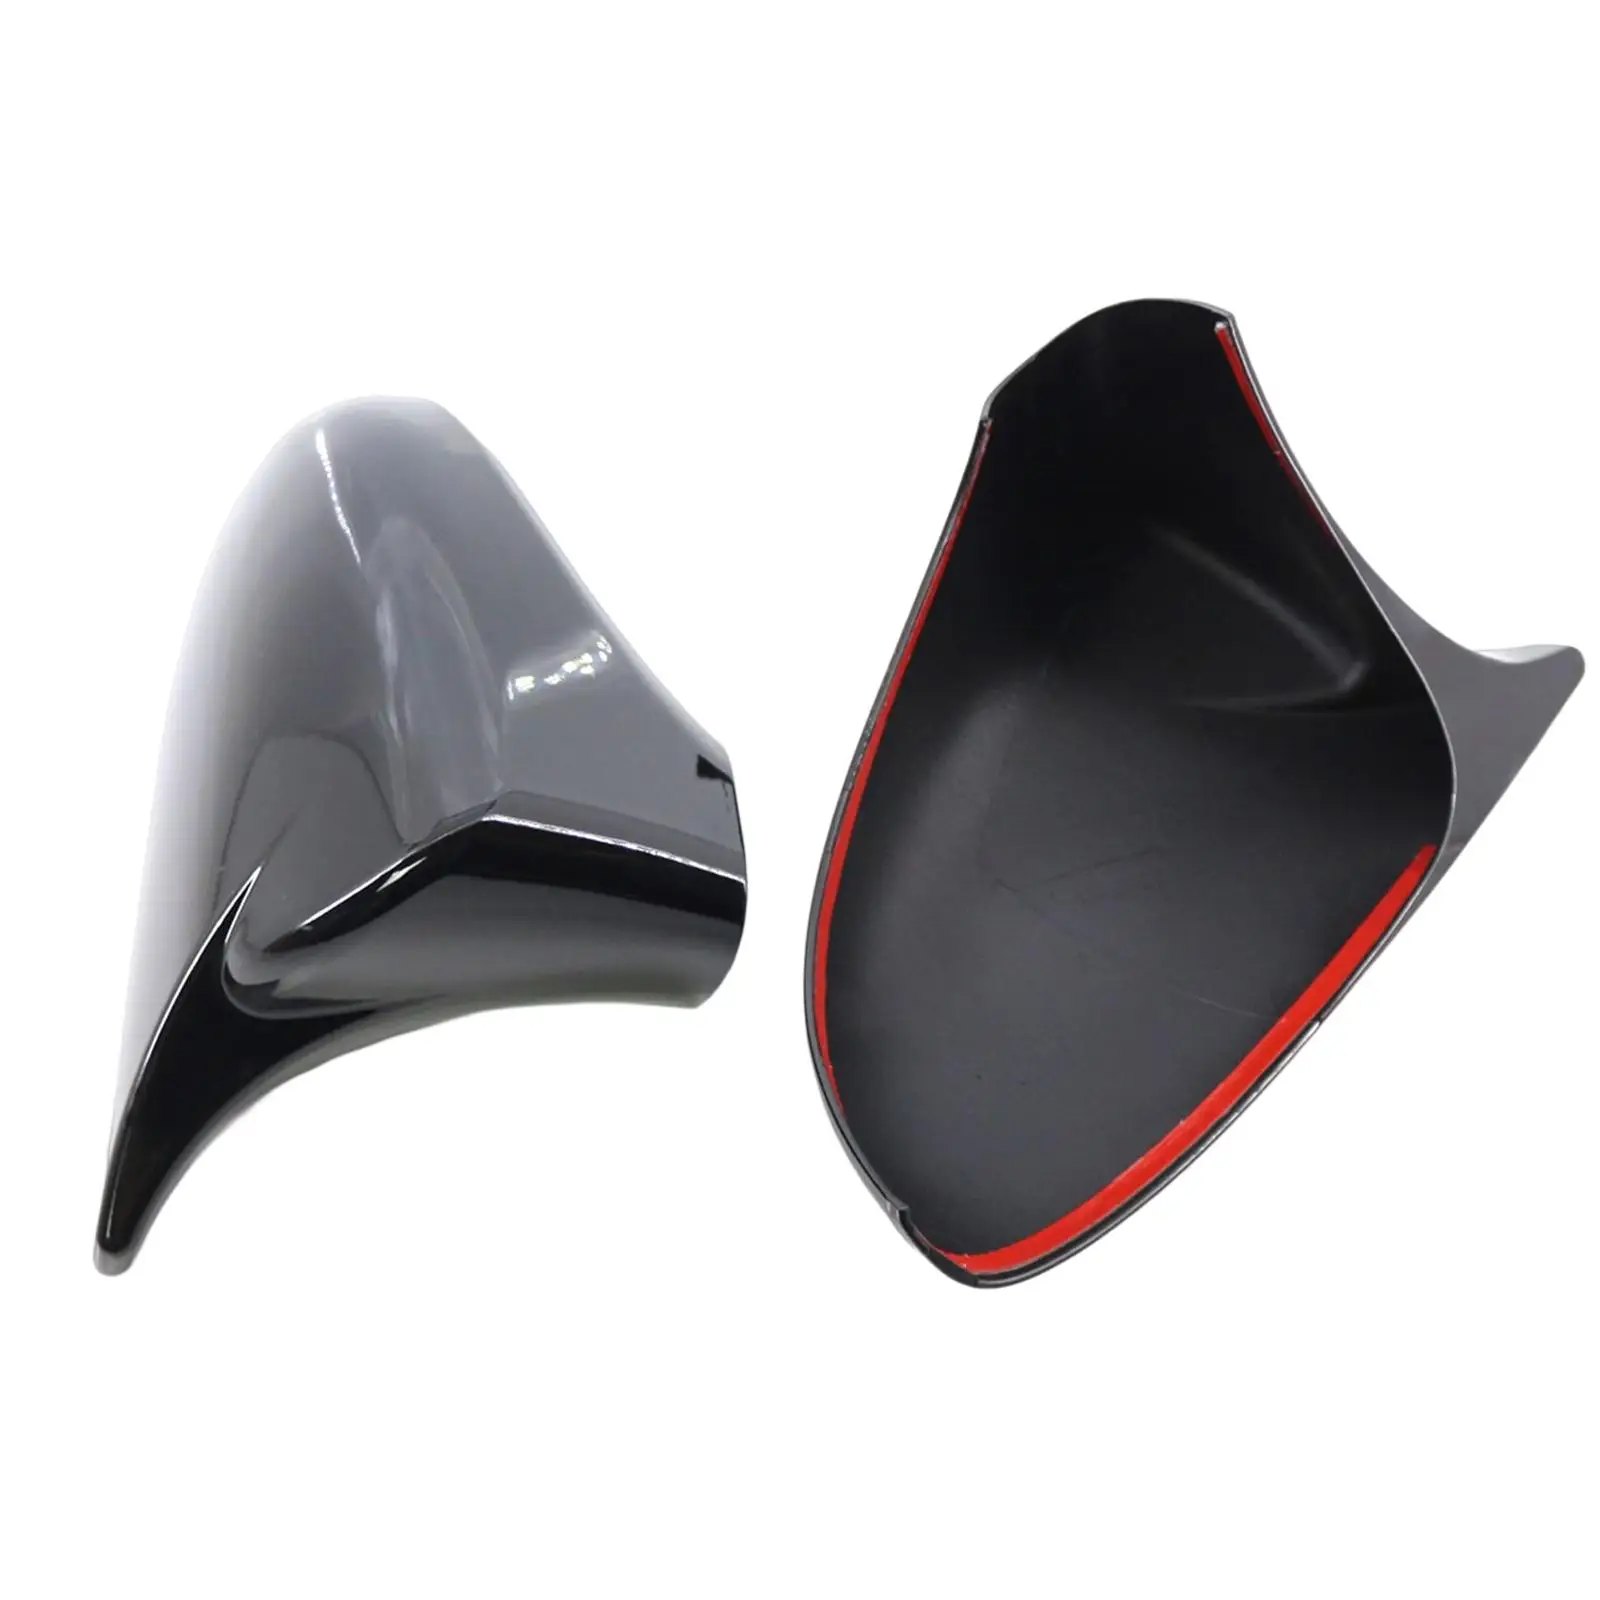 2 Pieces Vehicle Side View Mirror Covers 8794A30E00B1 for Lexus GS Gsf